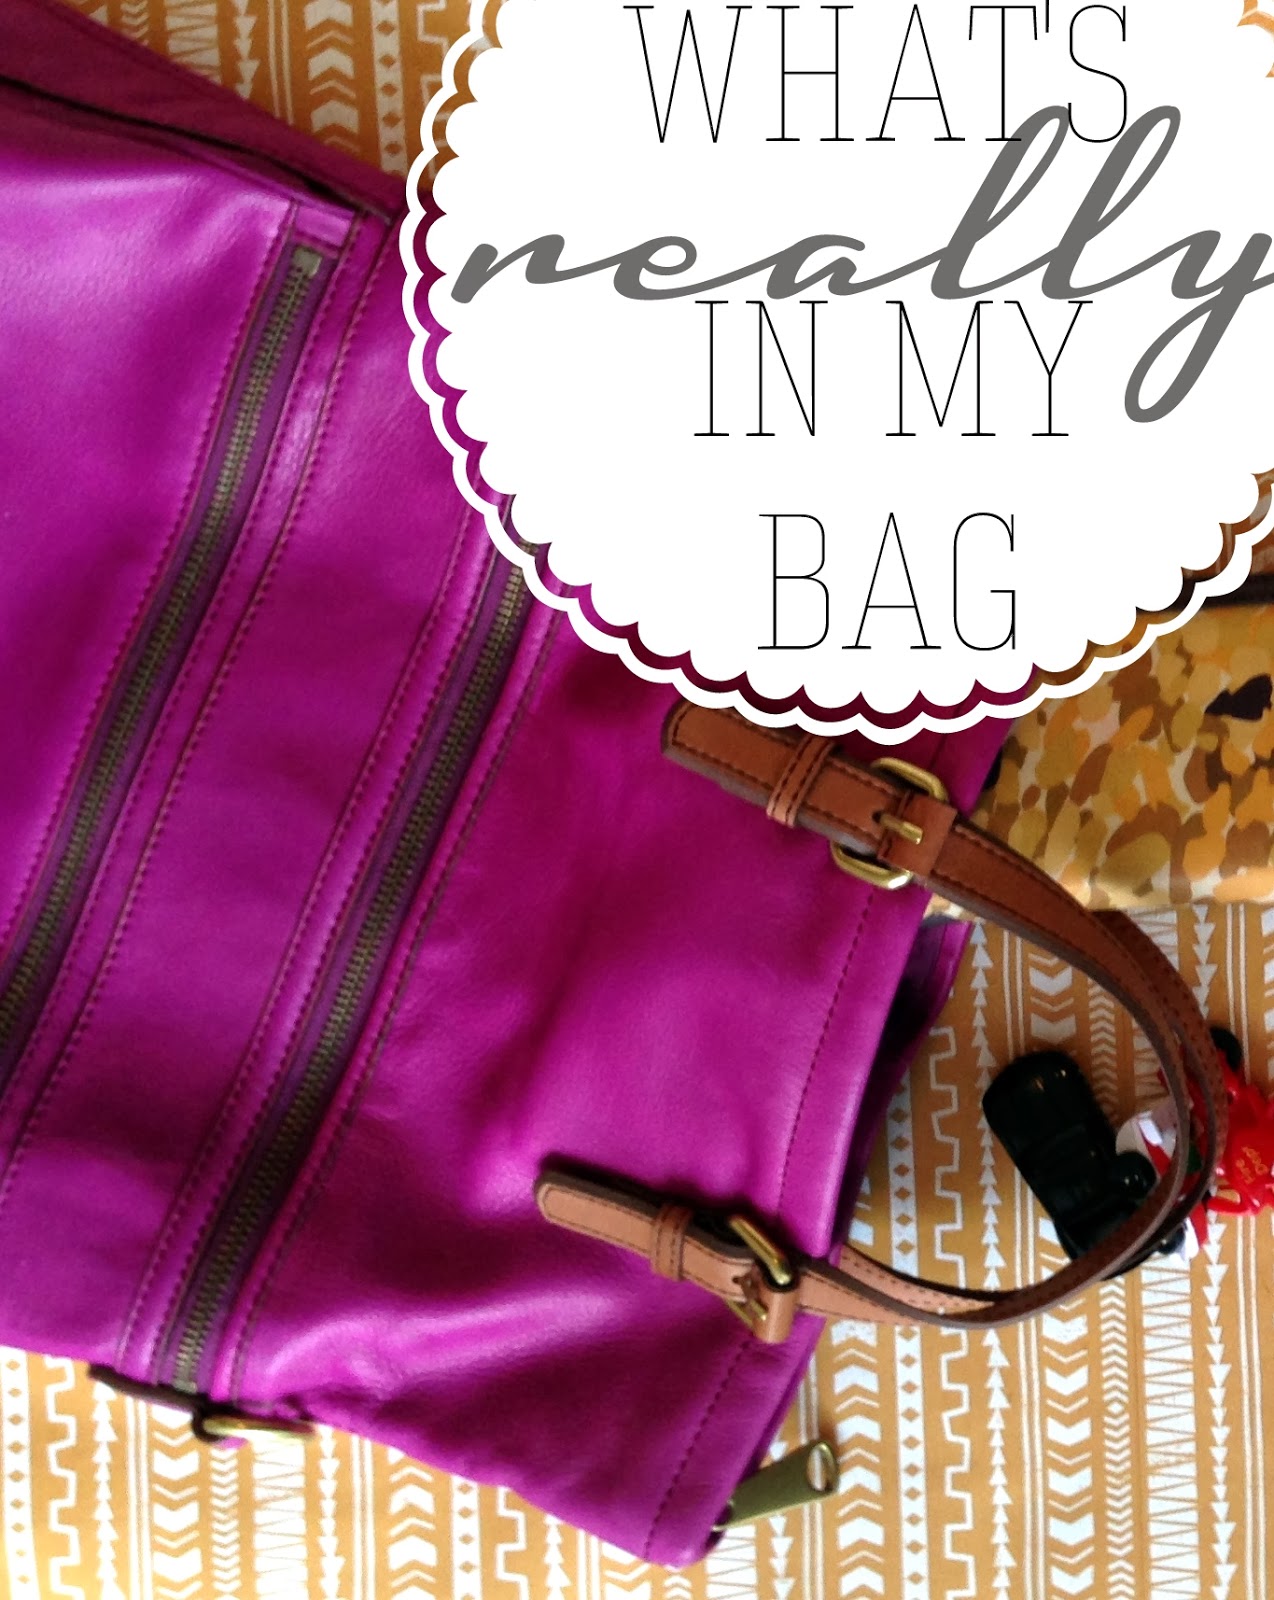 Tied Ribbon: What's (really) In My BAG